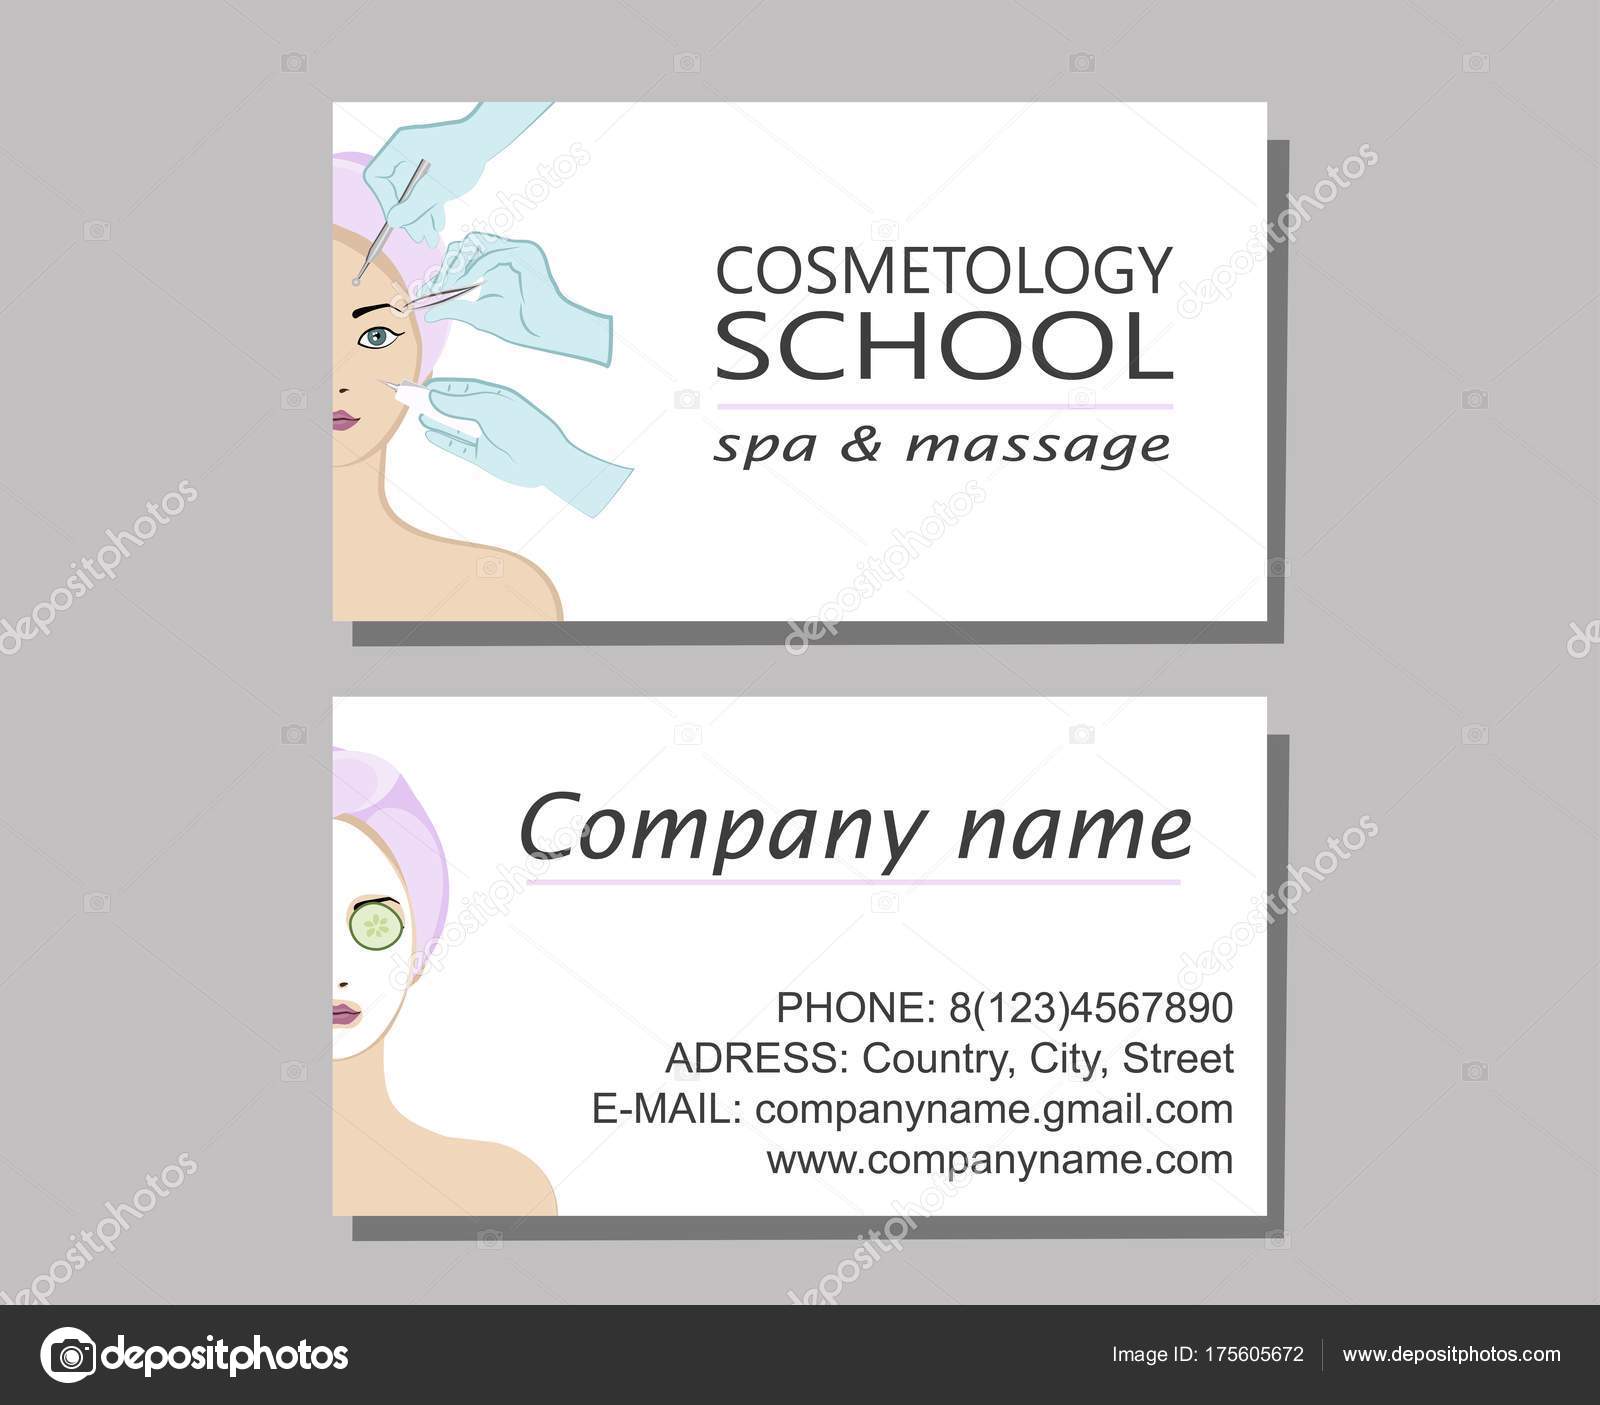 cosmetologist business cards 2